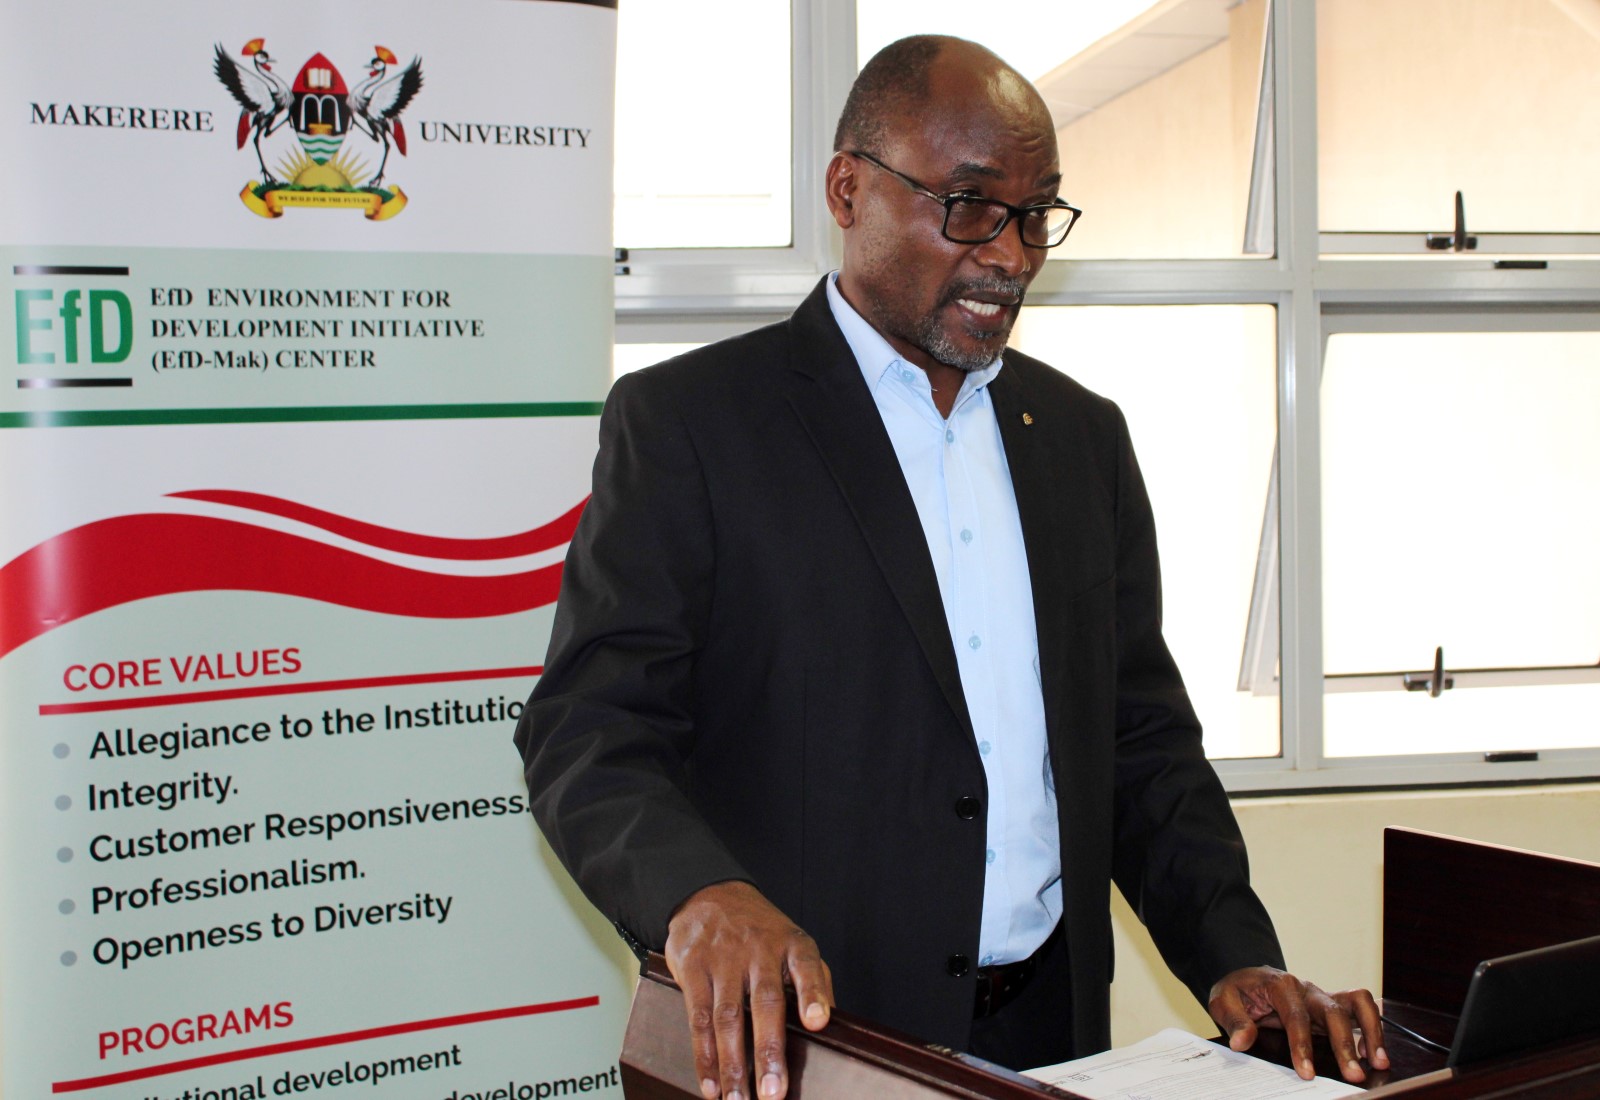 Dr. Yawe Bruno the Deputy Principal, College of Business and Management Sciences (CoBAMS) officially opening the workshop on 15th July 2022 at Makerere University.